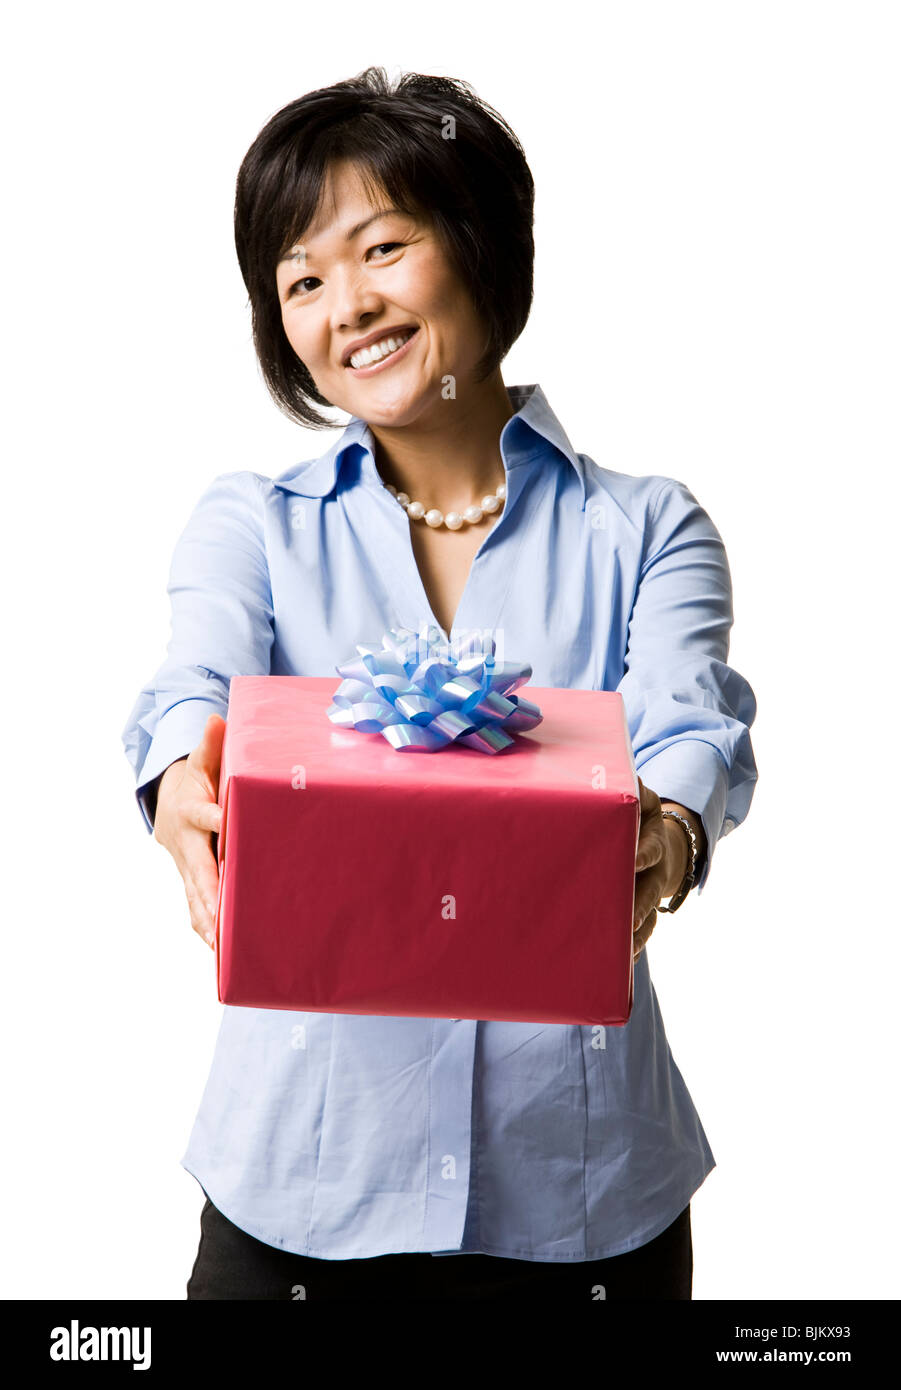 Woman with gift box Stock Photo